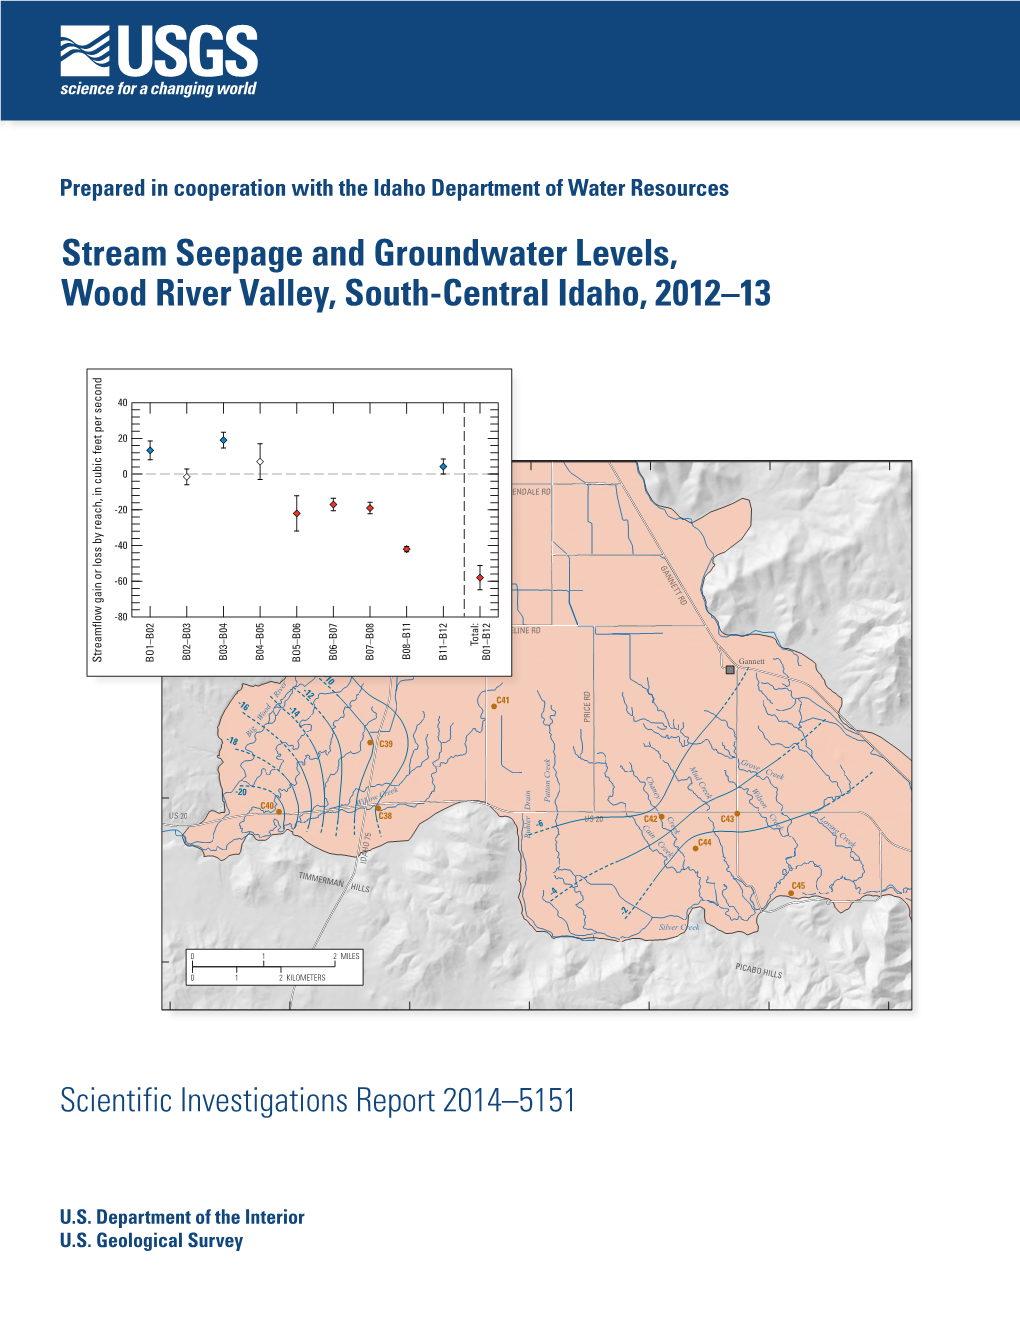 Stream Seepage and Groundwater Levels, Wood River Valley, South-Central Idaho, 2012–13